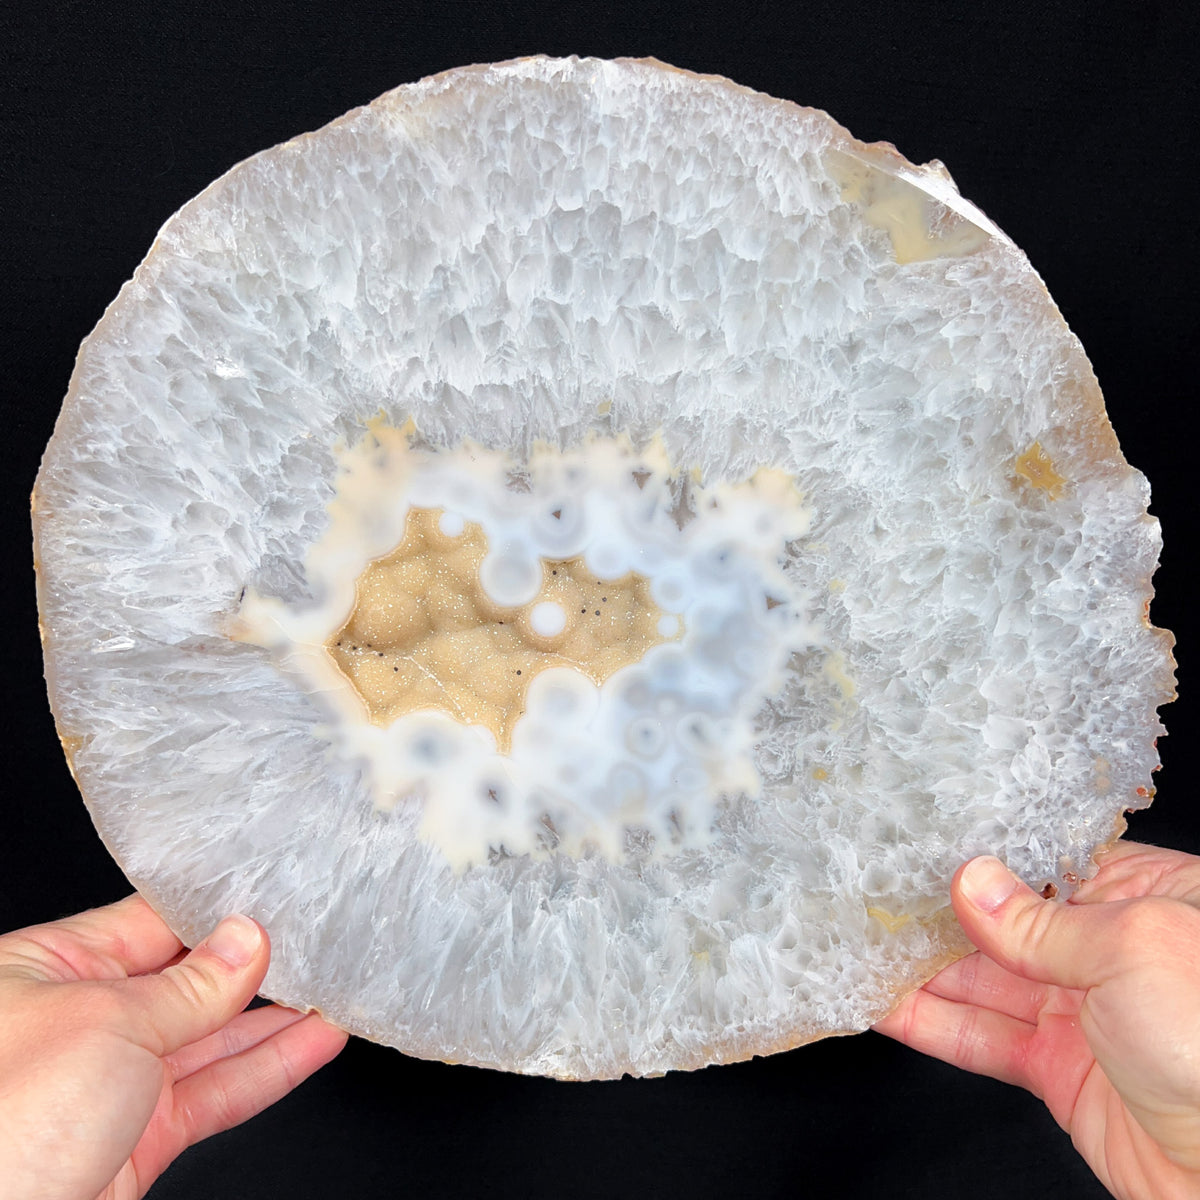 Extra Large Geode Agate Slice with Drusy Quartz Crystals